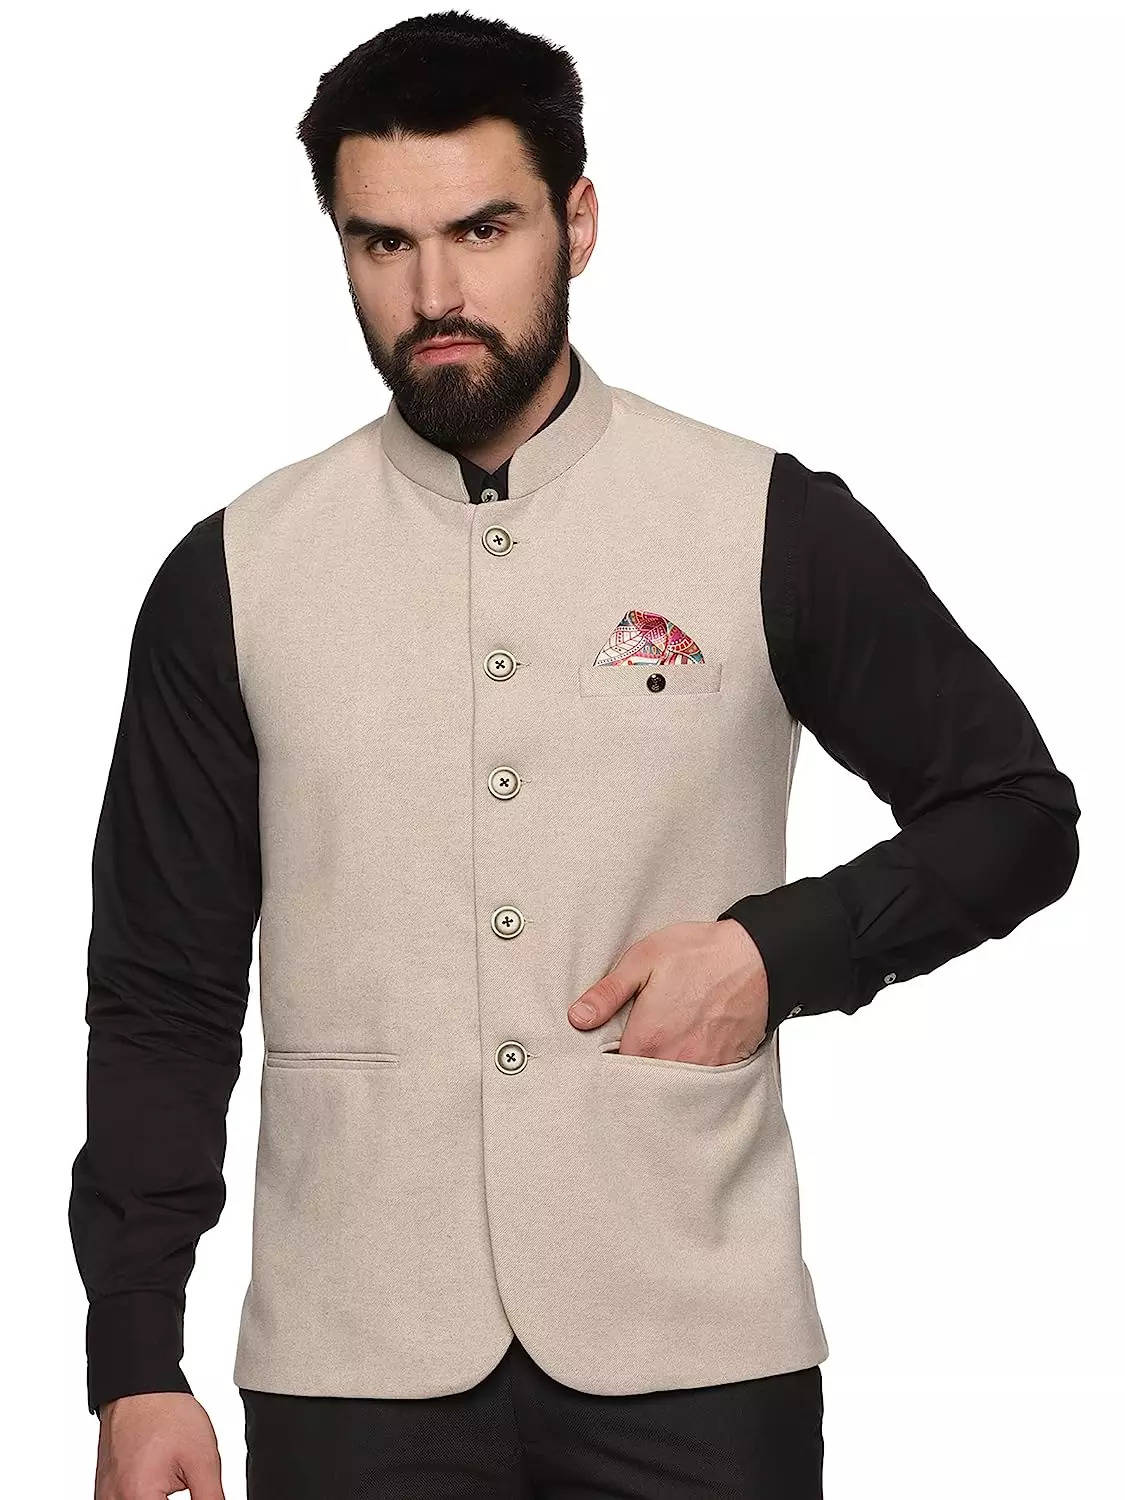 U.S. POLO ASSN. Striped Nehru Jacket Charcoal, 2XL in Chennai at best price  by Hi Style India Pvt Ltd - Justdial